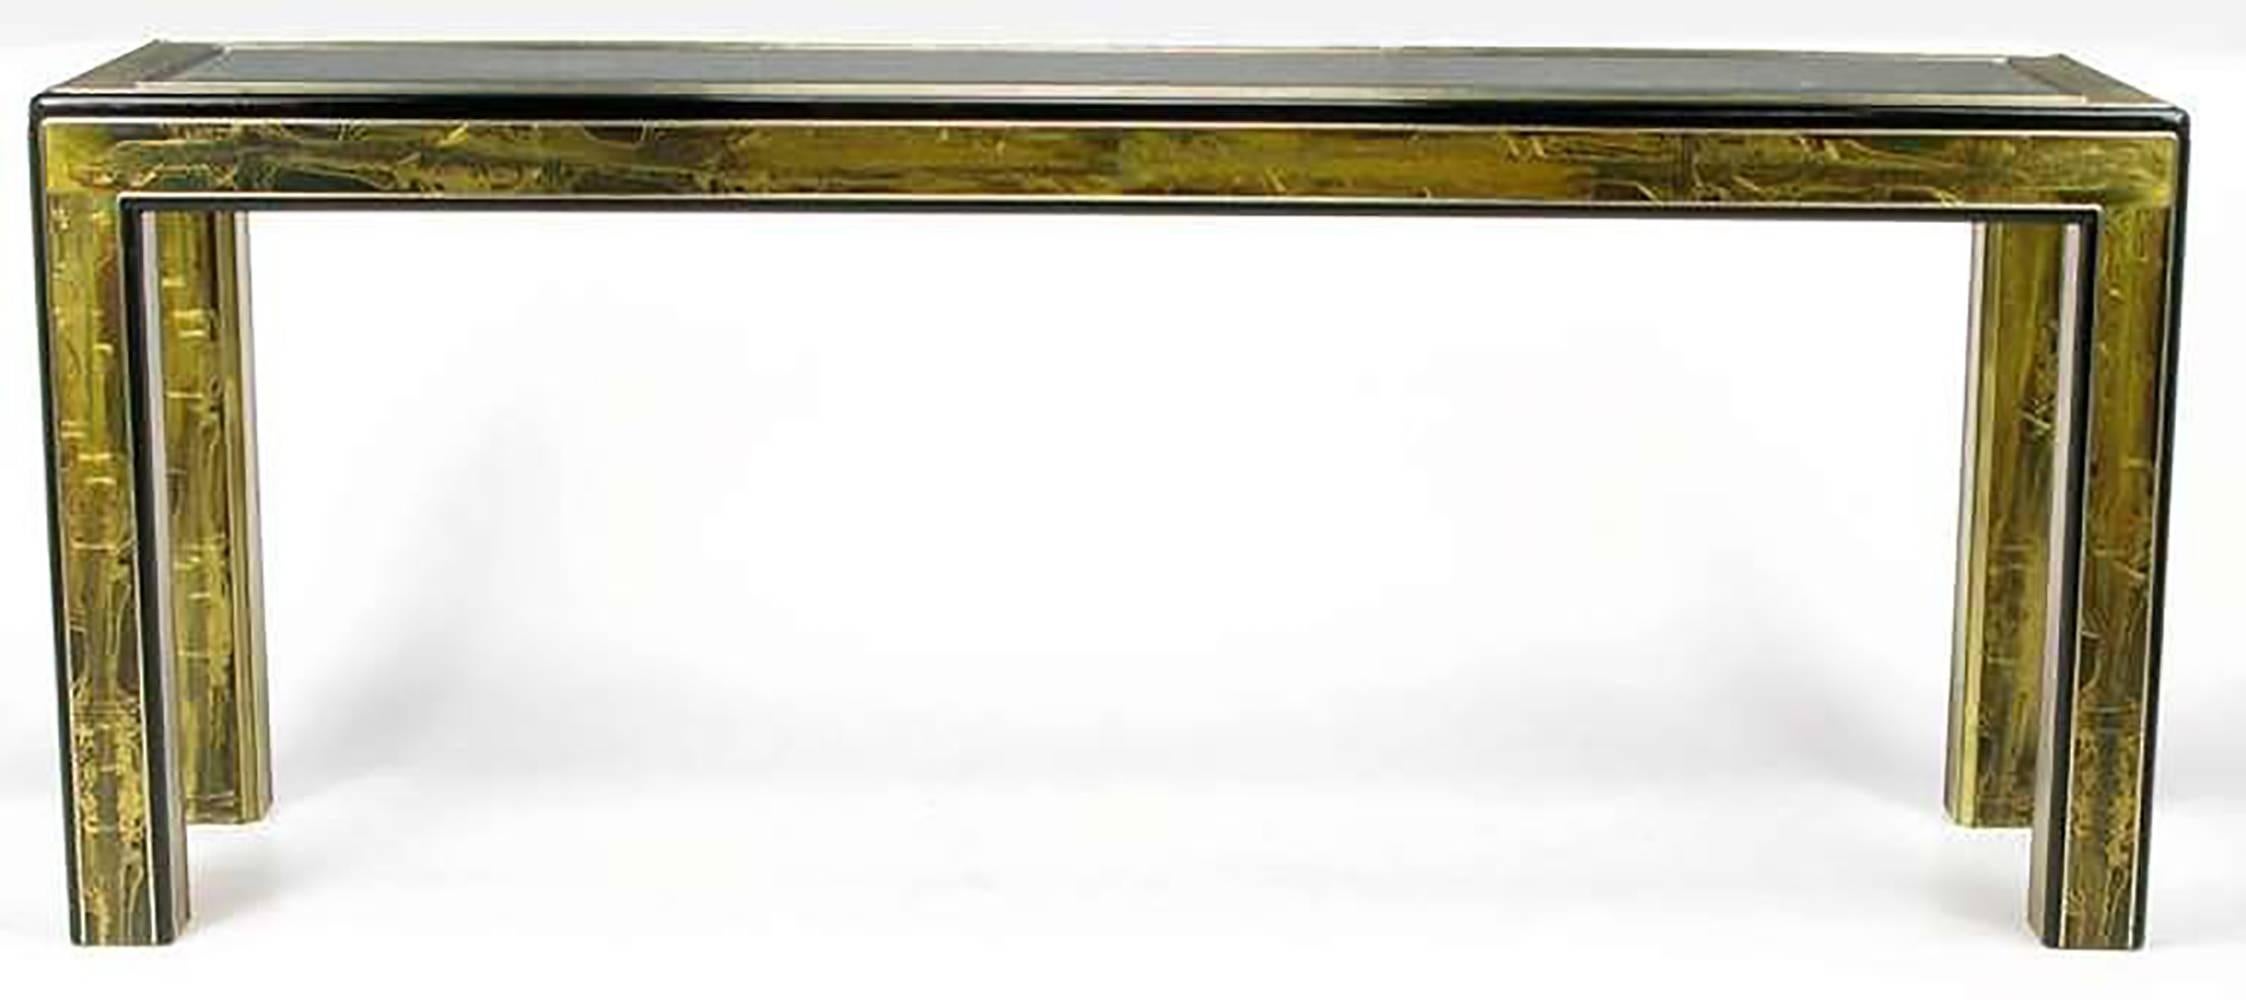 American Bernhard Rohne Acid Etched Brass Console Table by Mastercraft